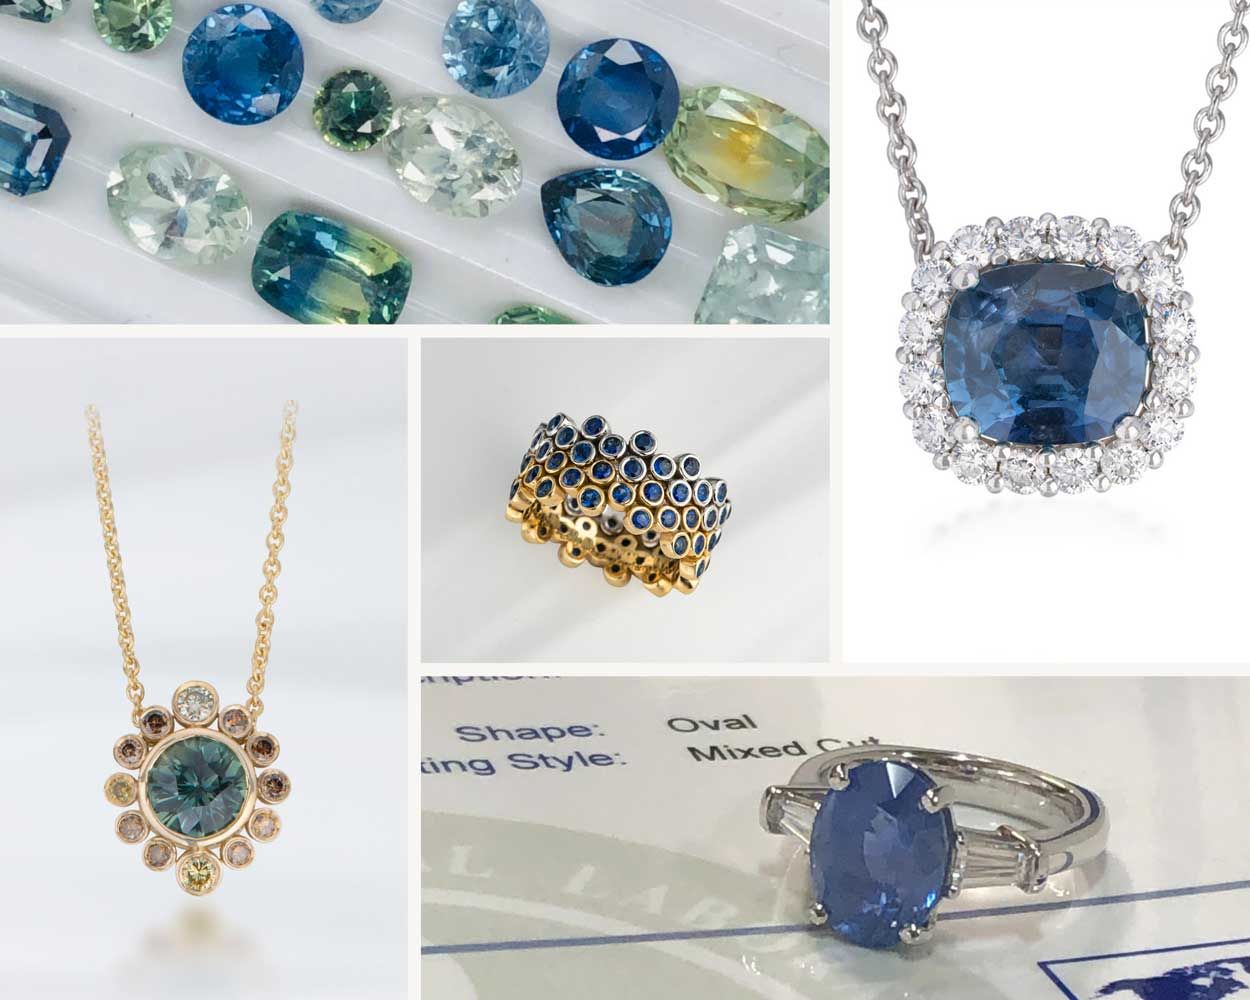 Collage of sapphire gemstones and jewelry